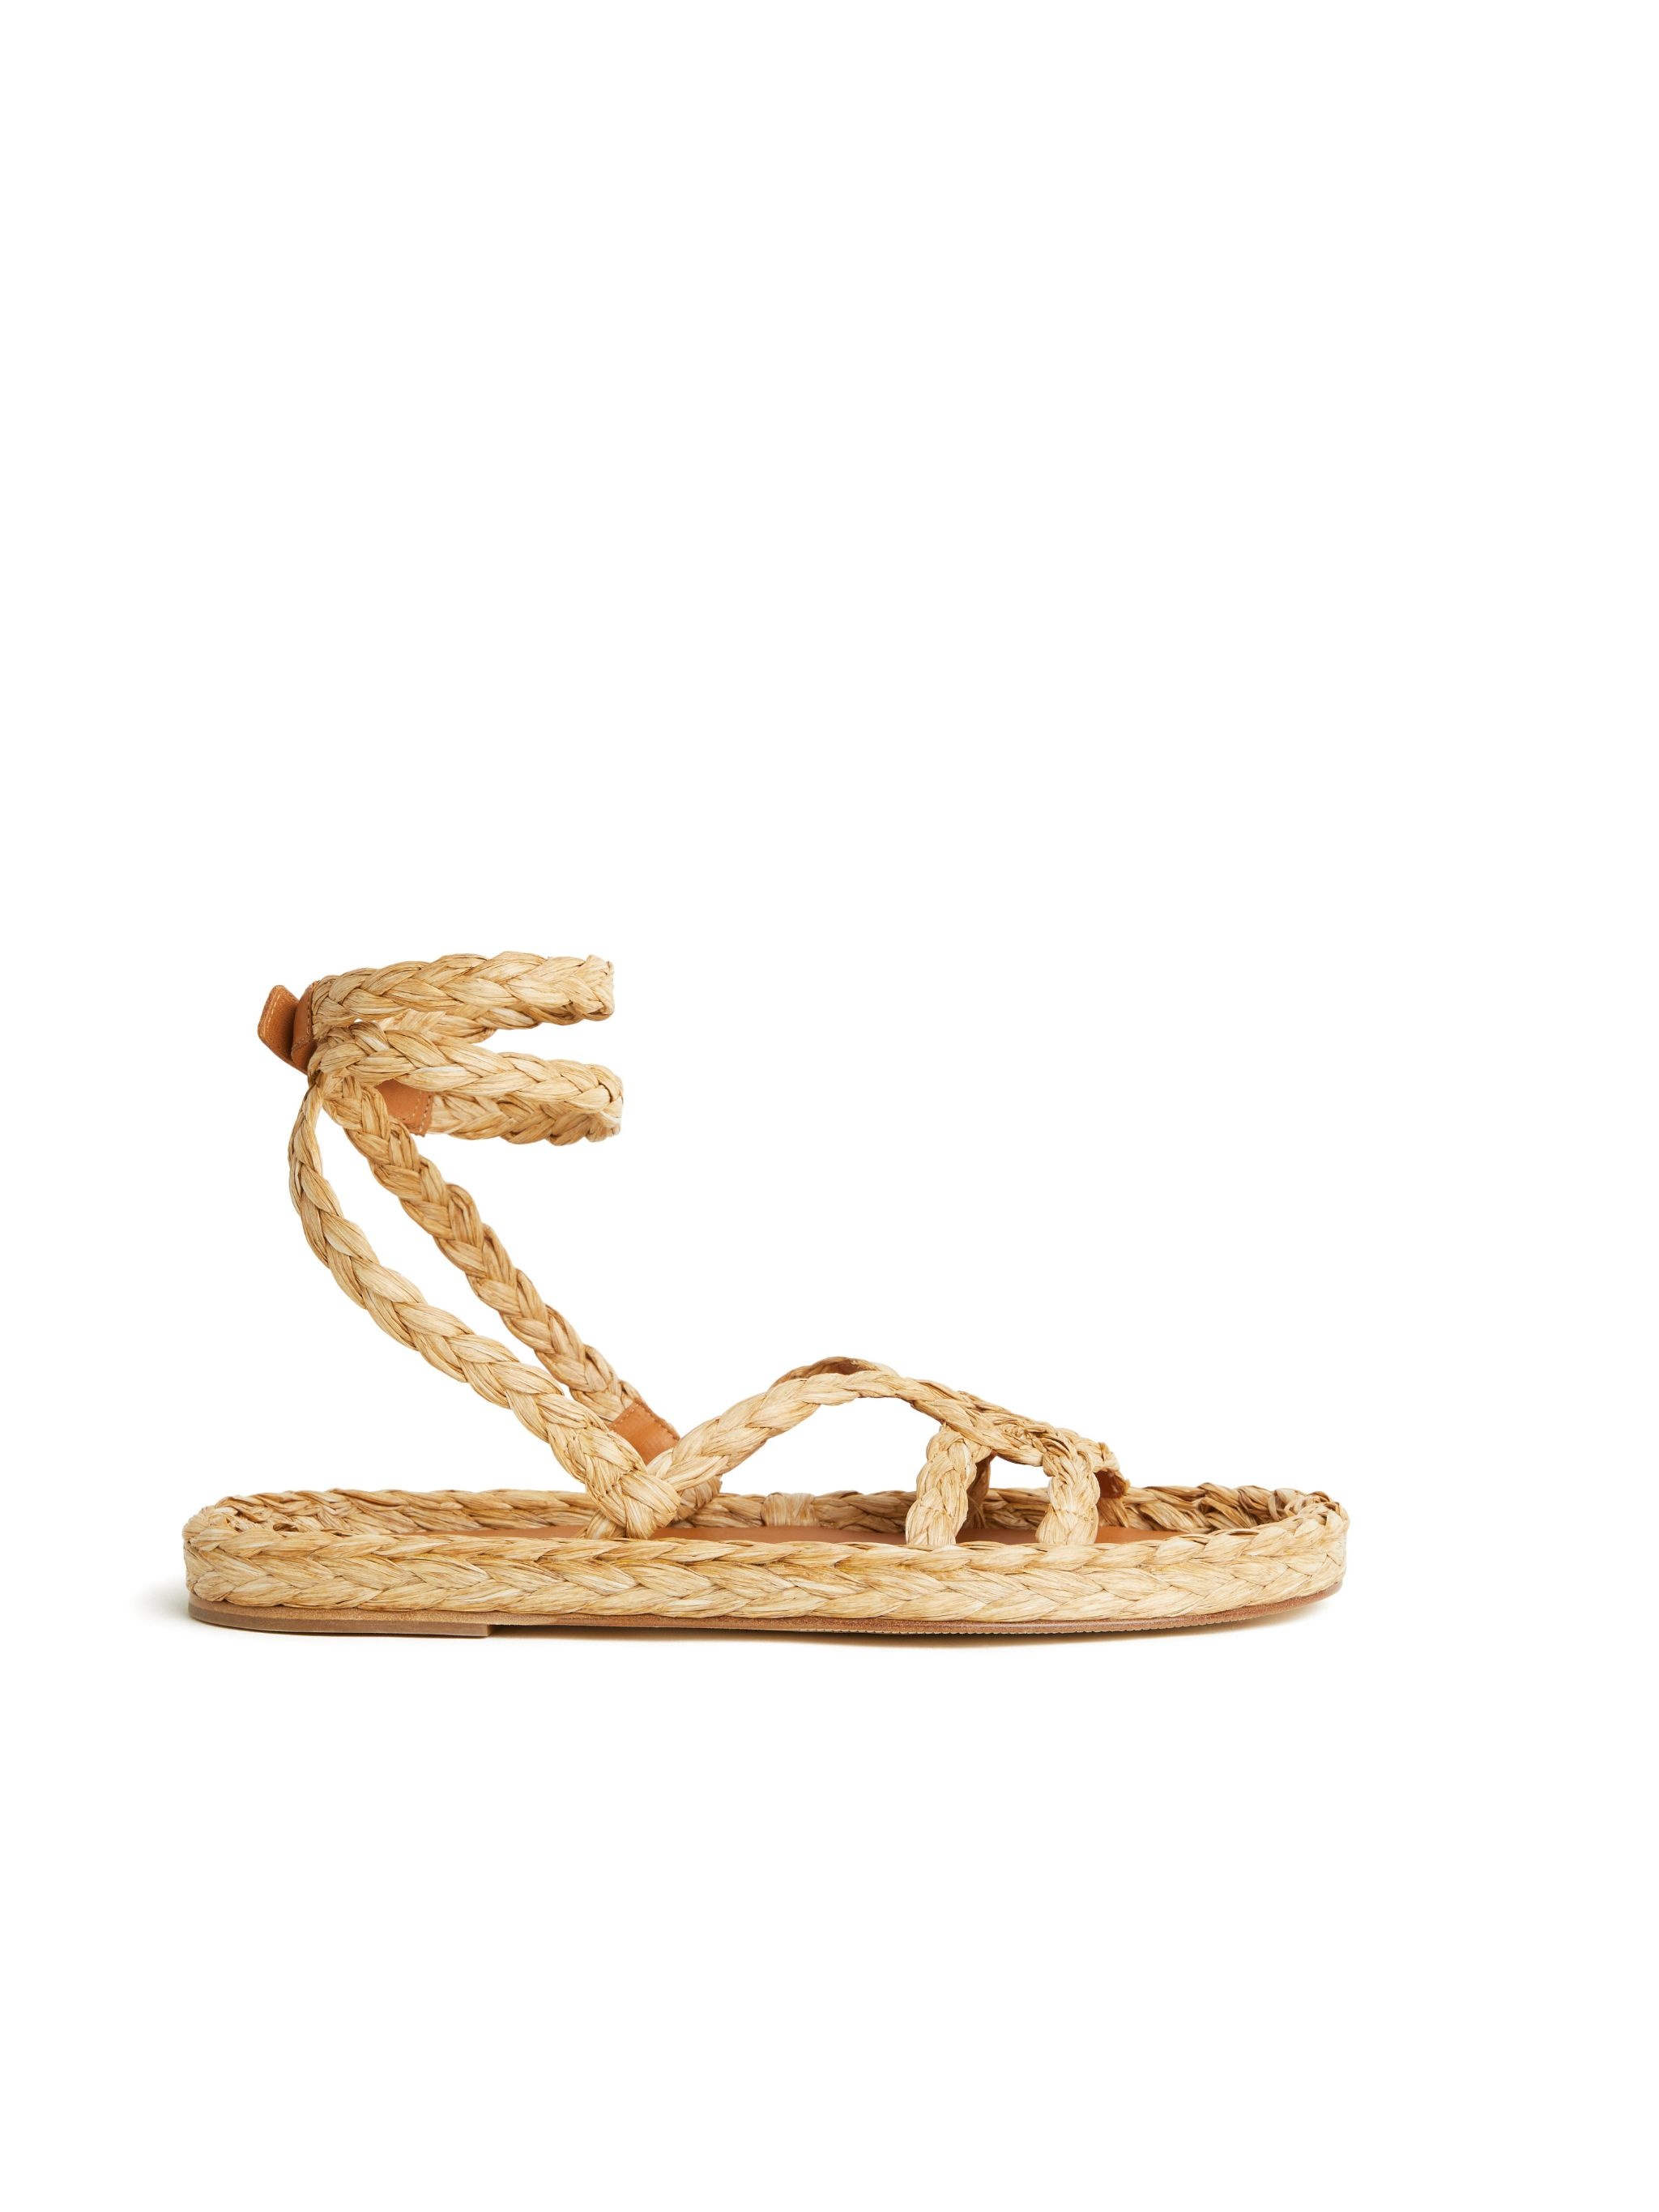 A Love Letter To India Sandals - 3